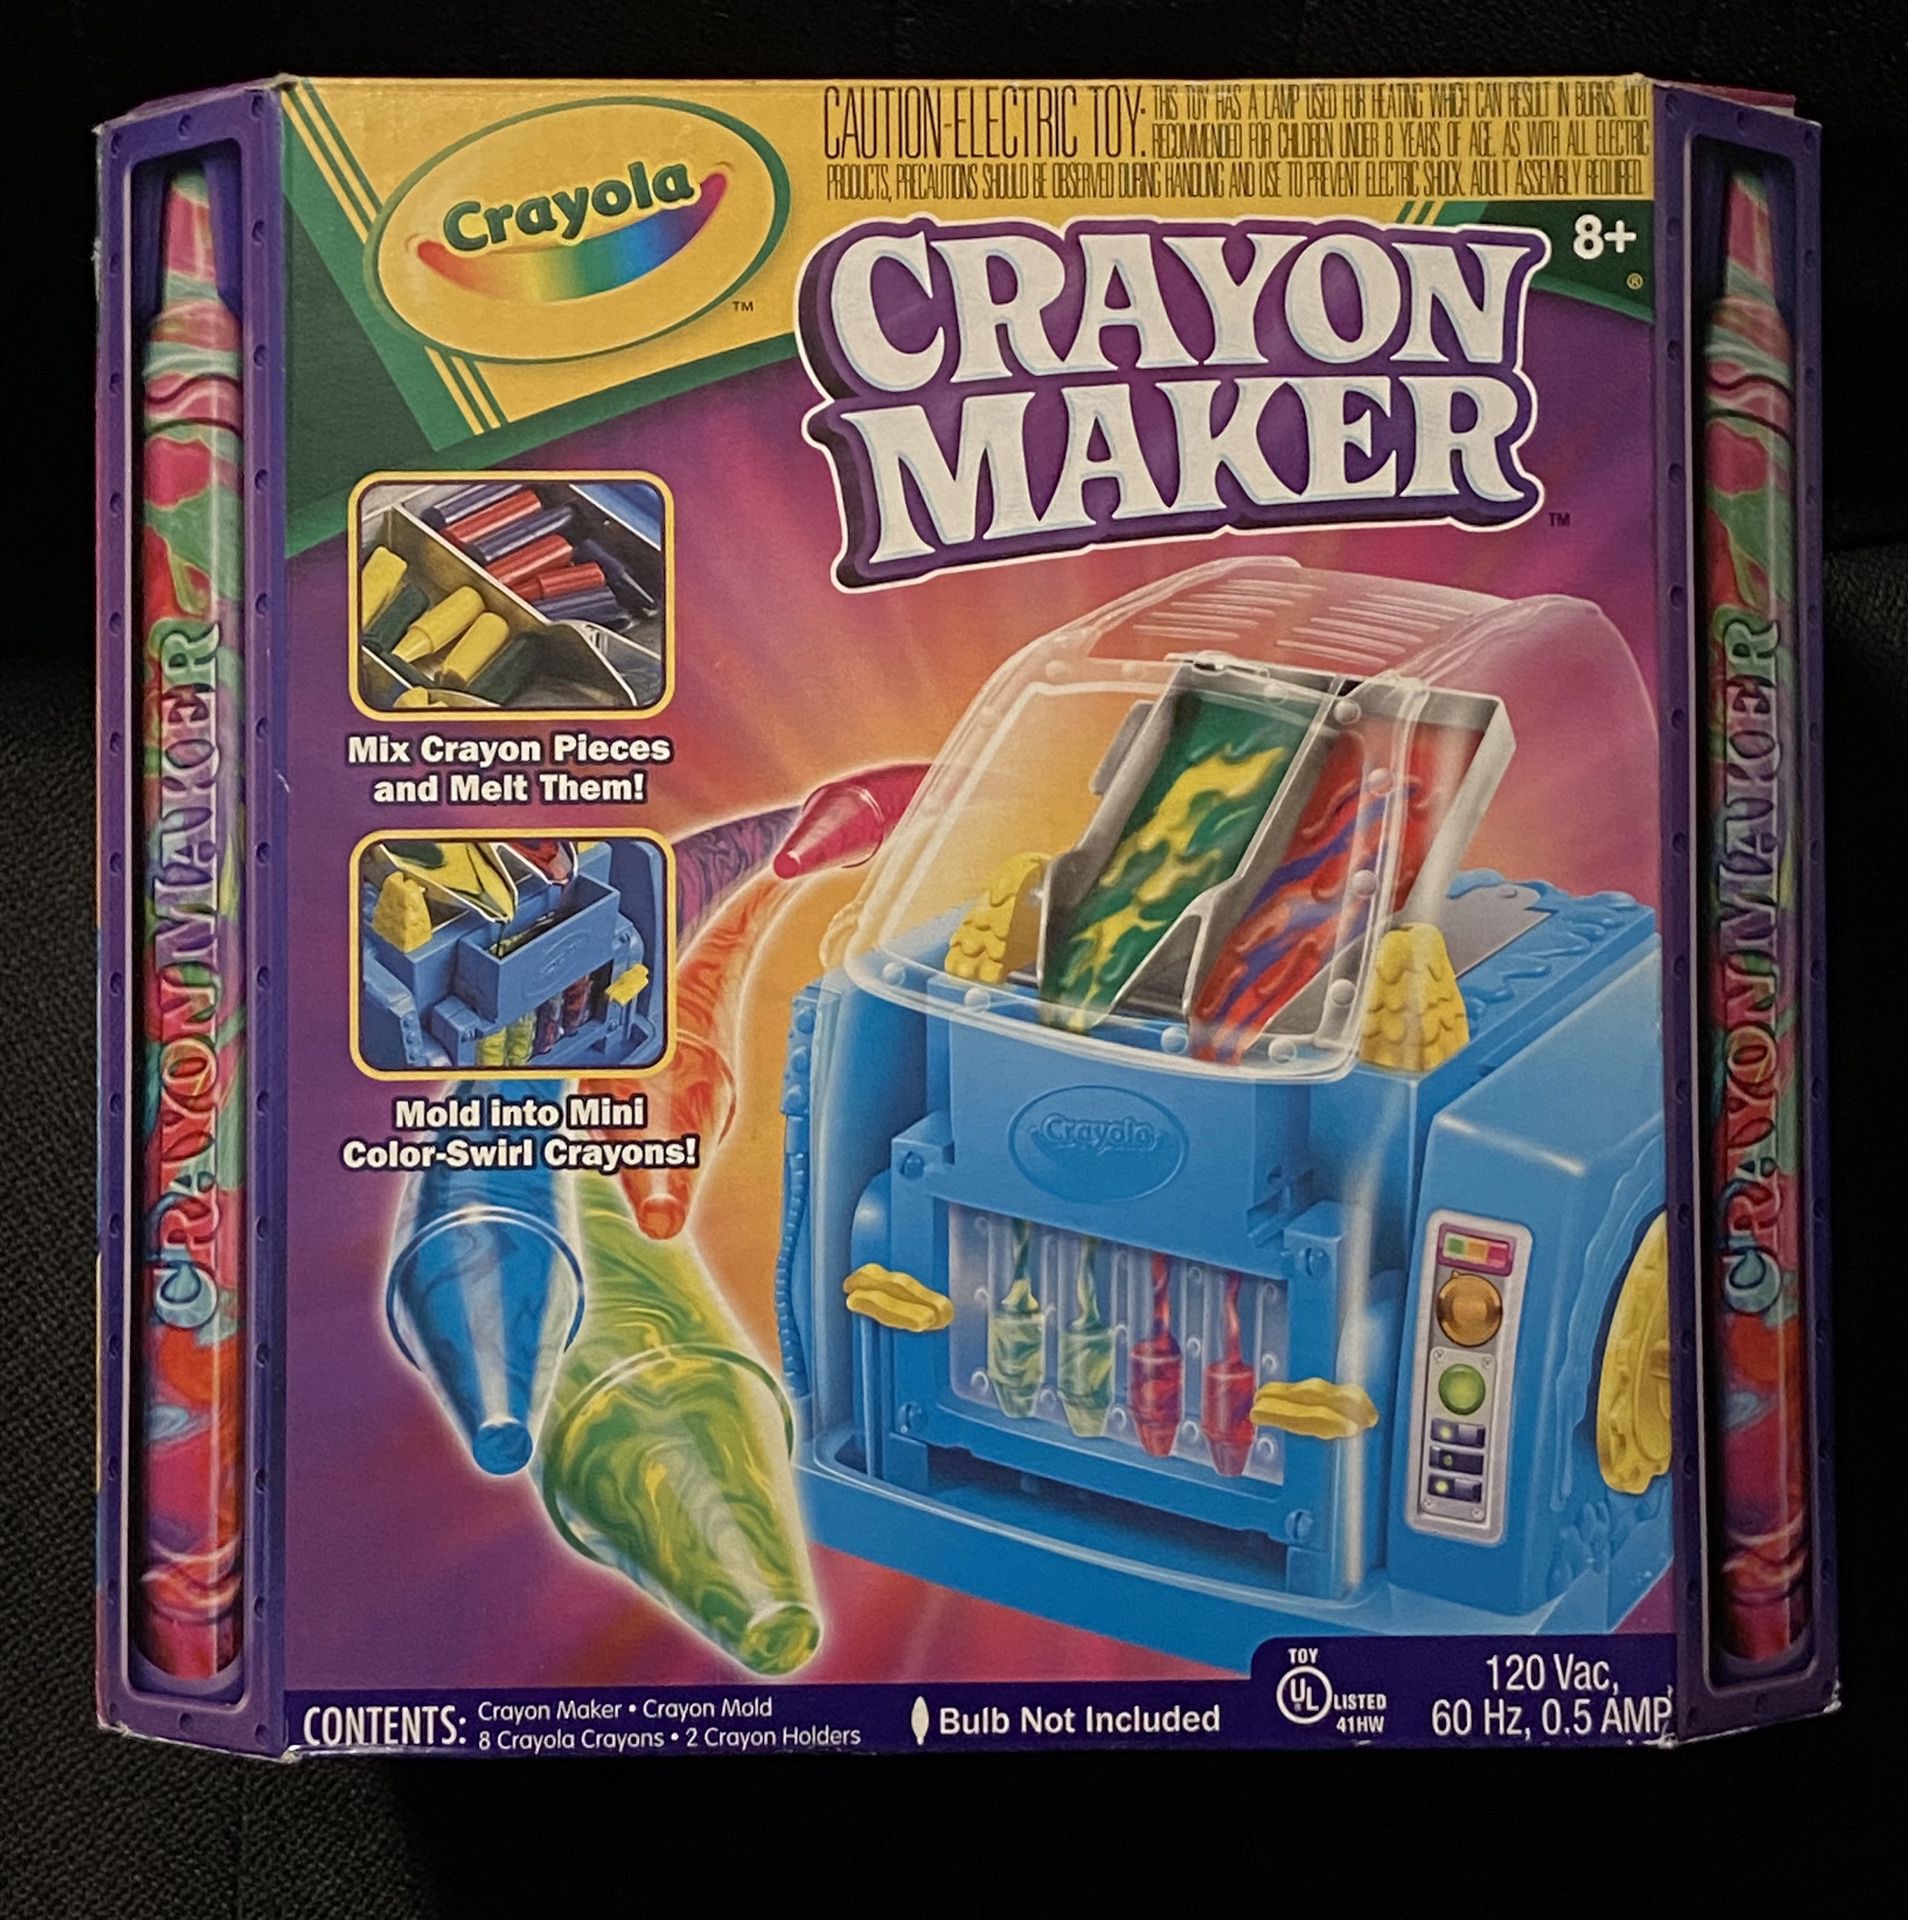 Large Crayola colored marker and pencil caddy for Sale in Olympia, WA -  OfferUp